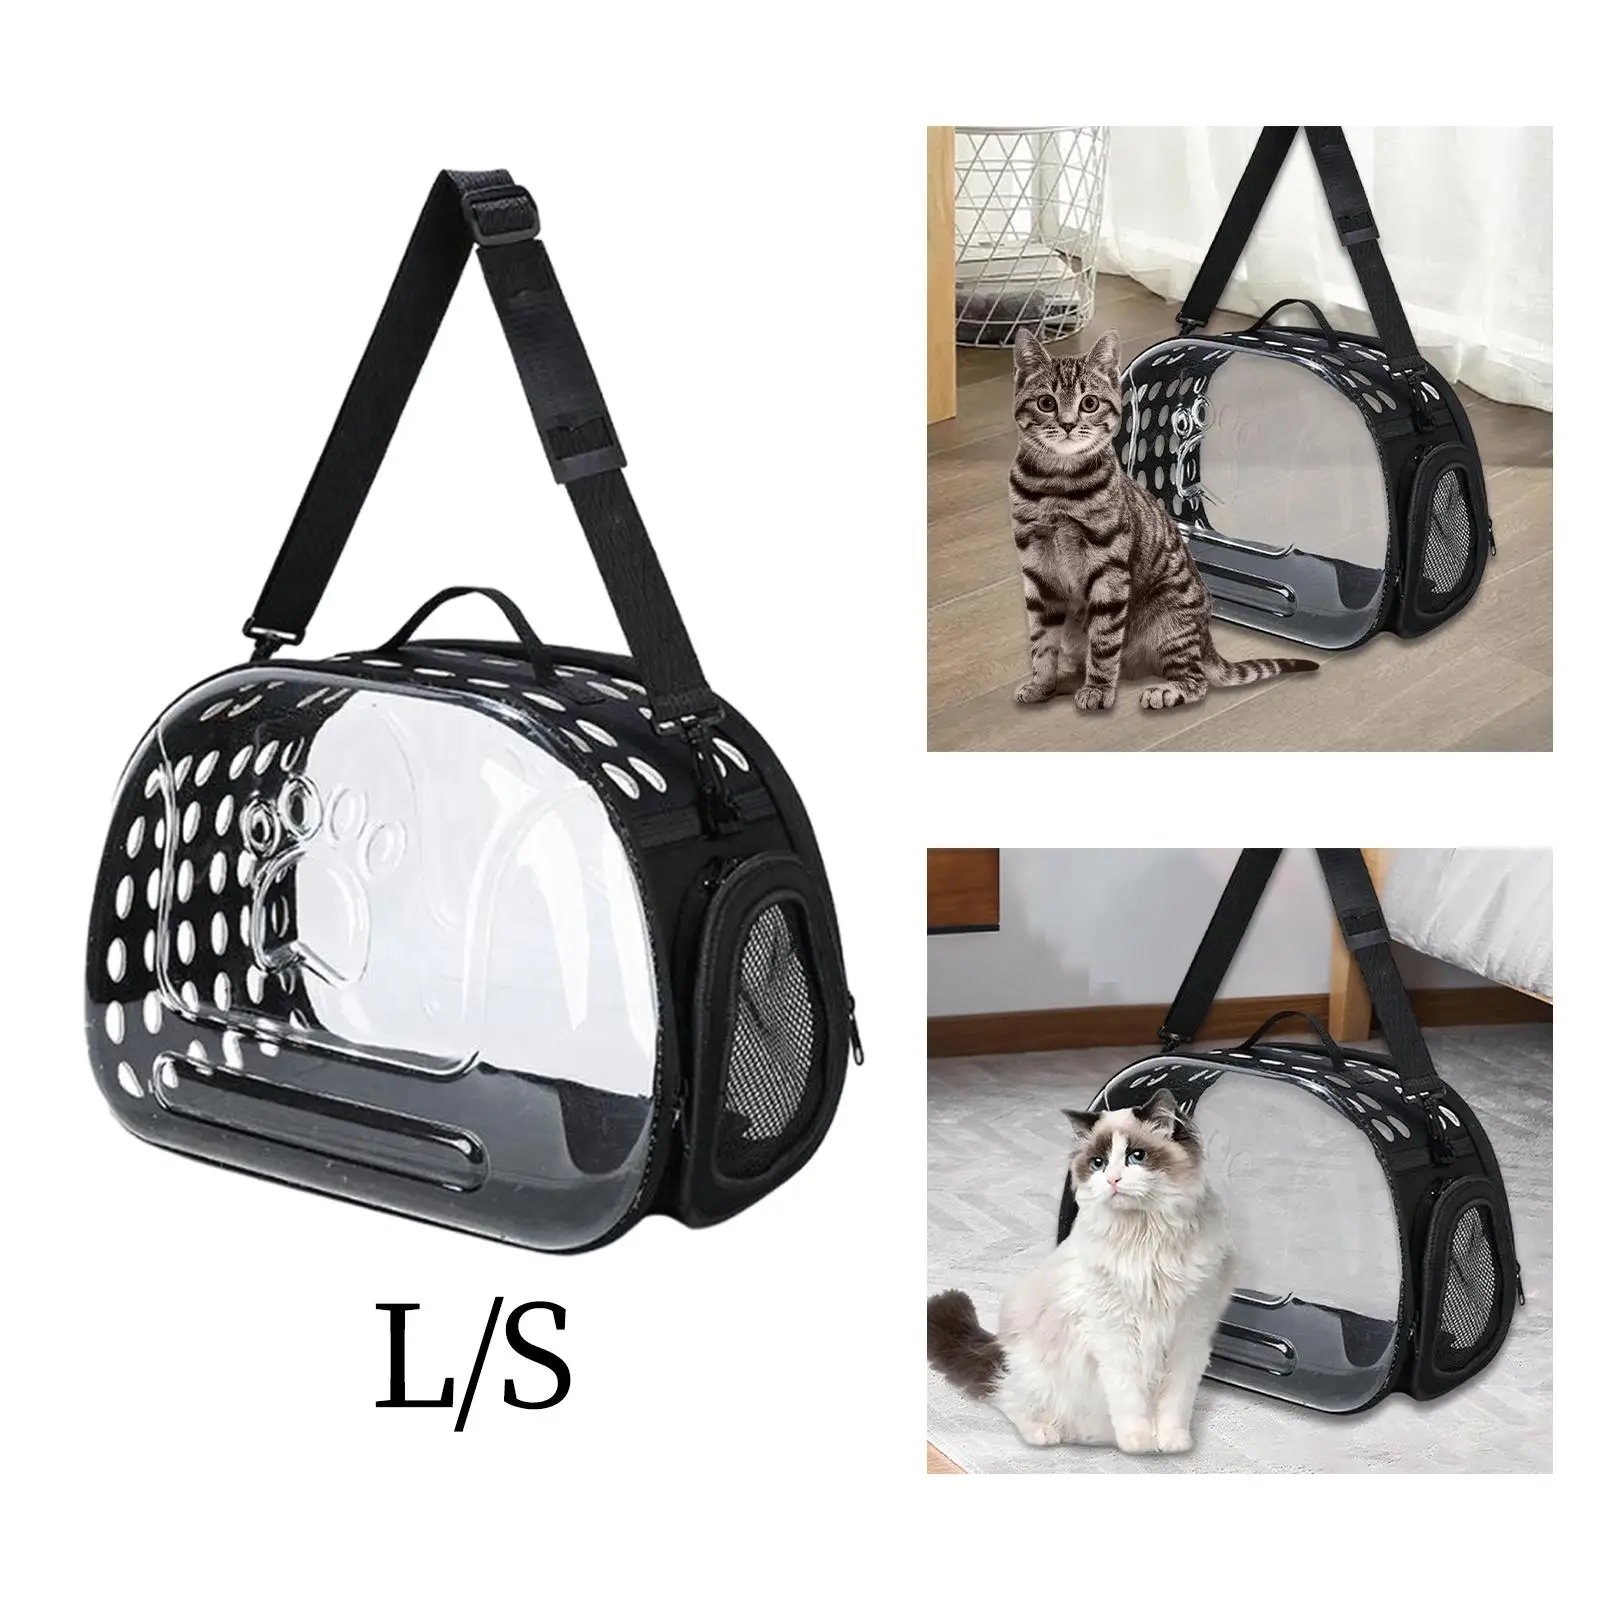 Portable Cat Carried Bag Carry Kennel Ventilated Travel Pet Bubble Backpack for Outdoor Kitten Travel Walking Small Medium Dogs